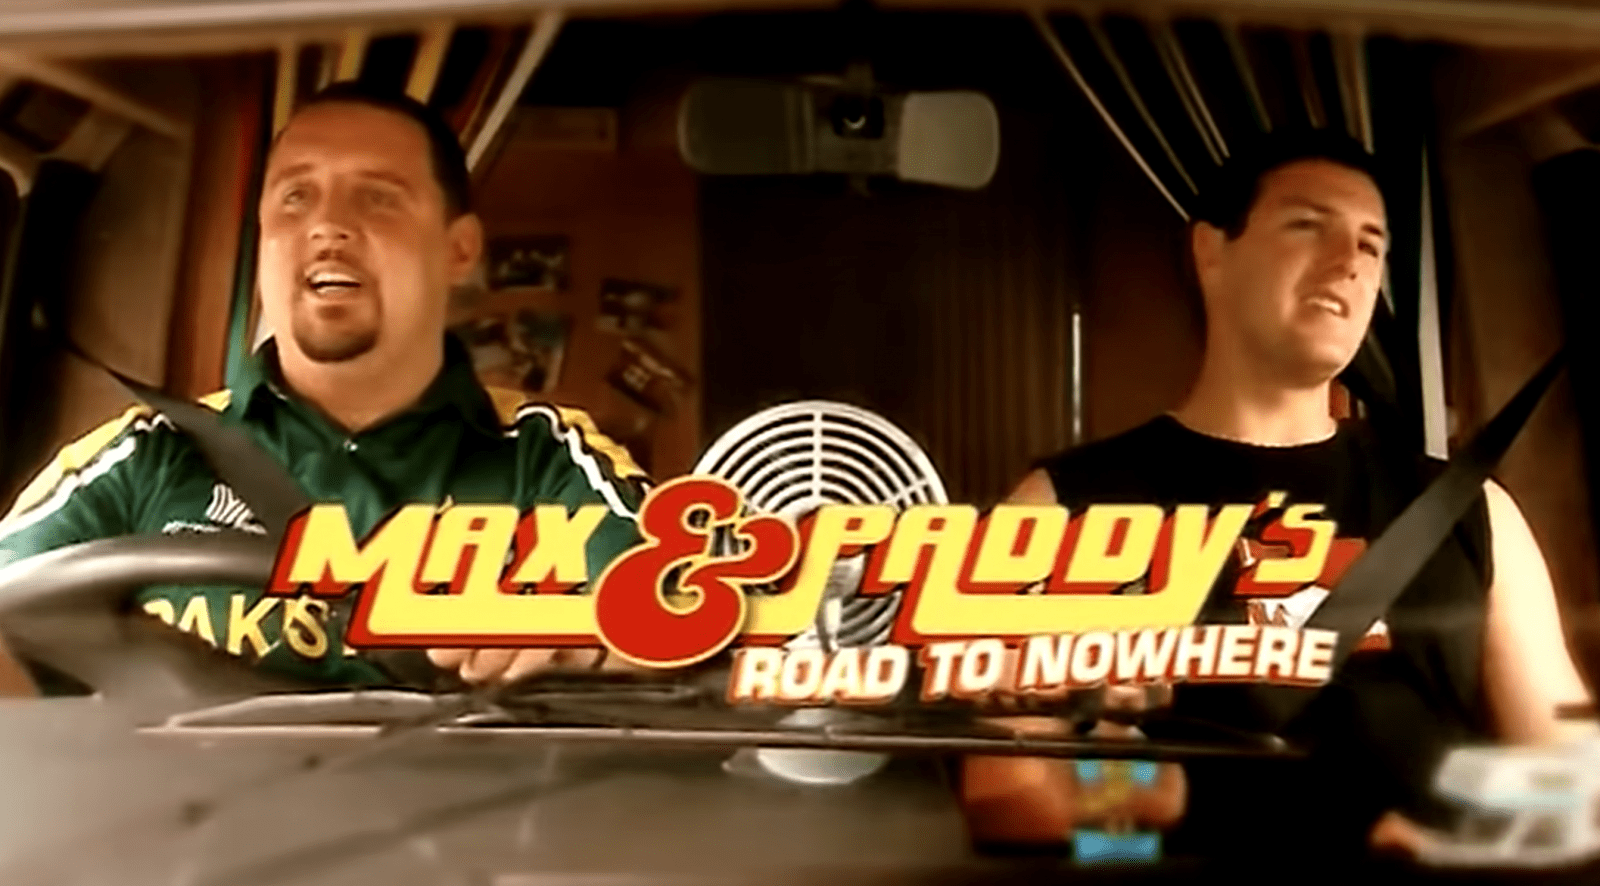 Paddy McGuinness joins Peter Kay in teasing the return of Max and Paddy&#8217;s Road to Nowhere, The Manc